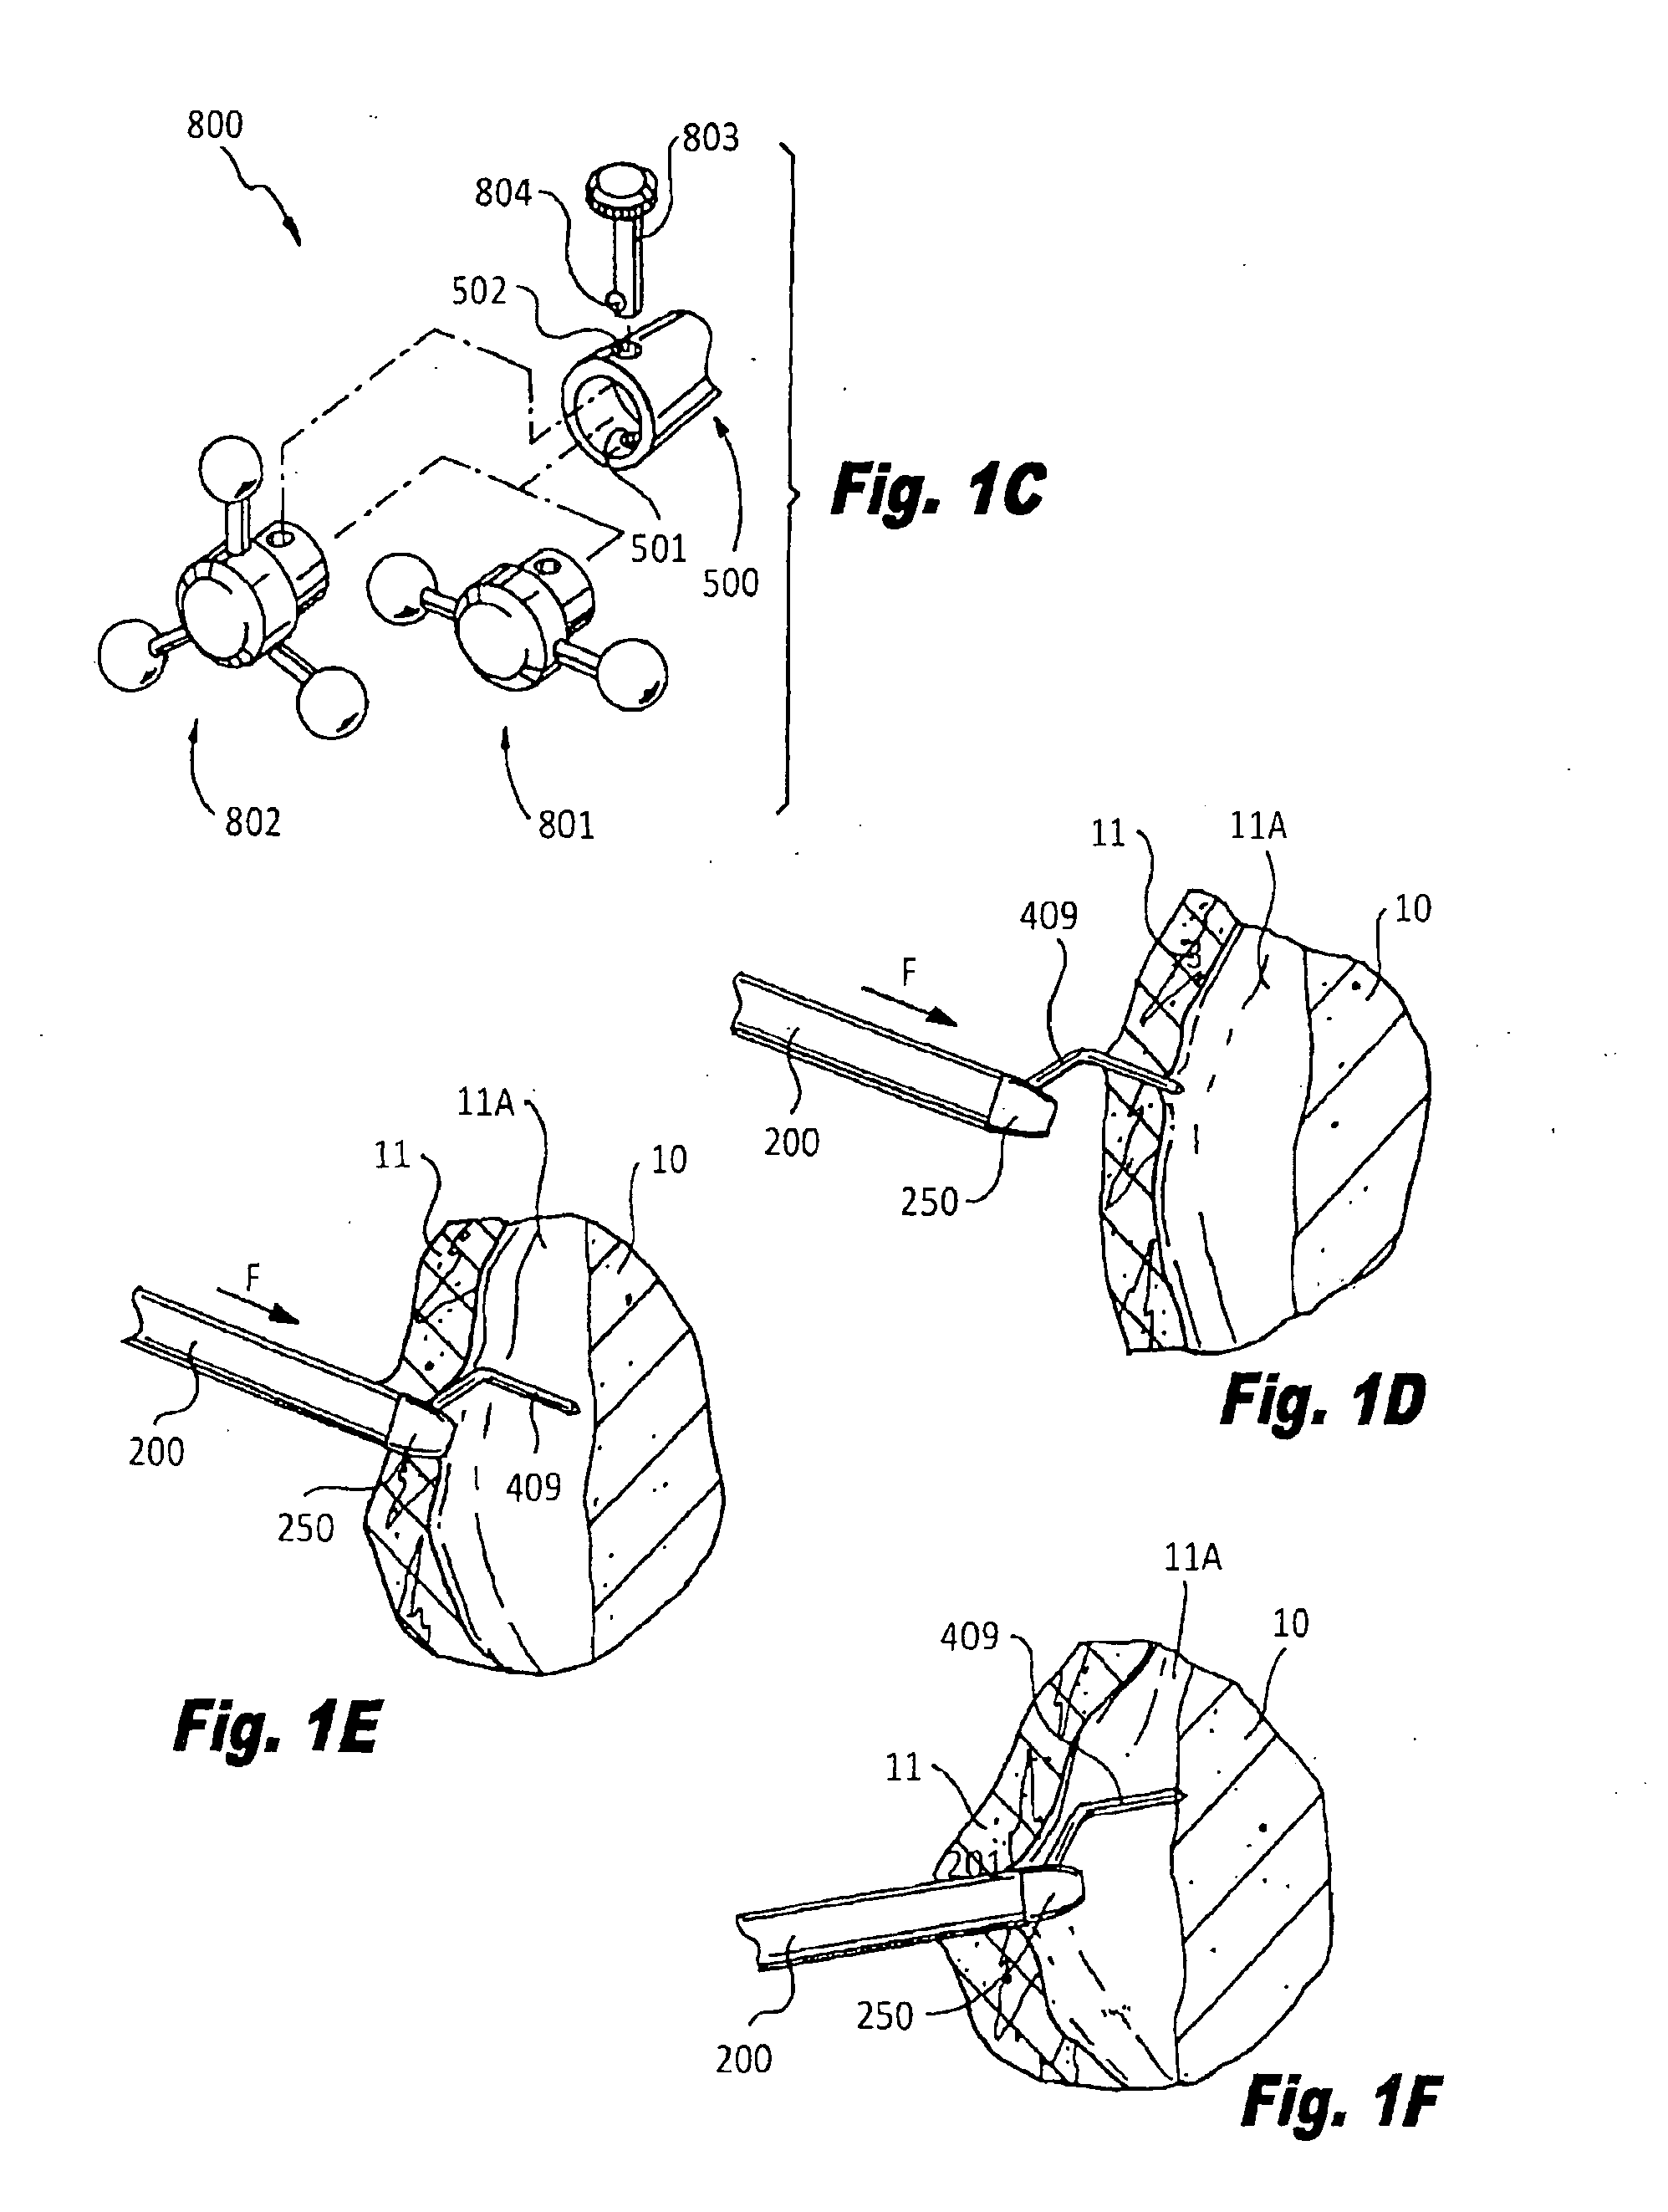 Cannulated apparatus and method relating to microfracture and revascularization methodologies